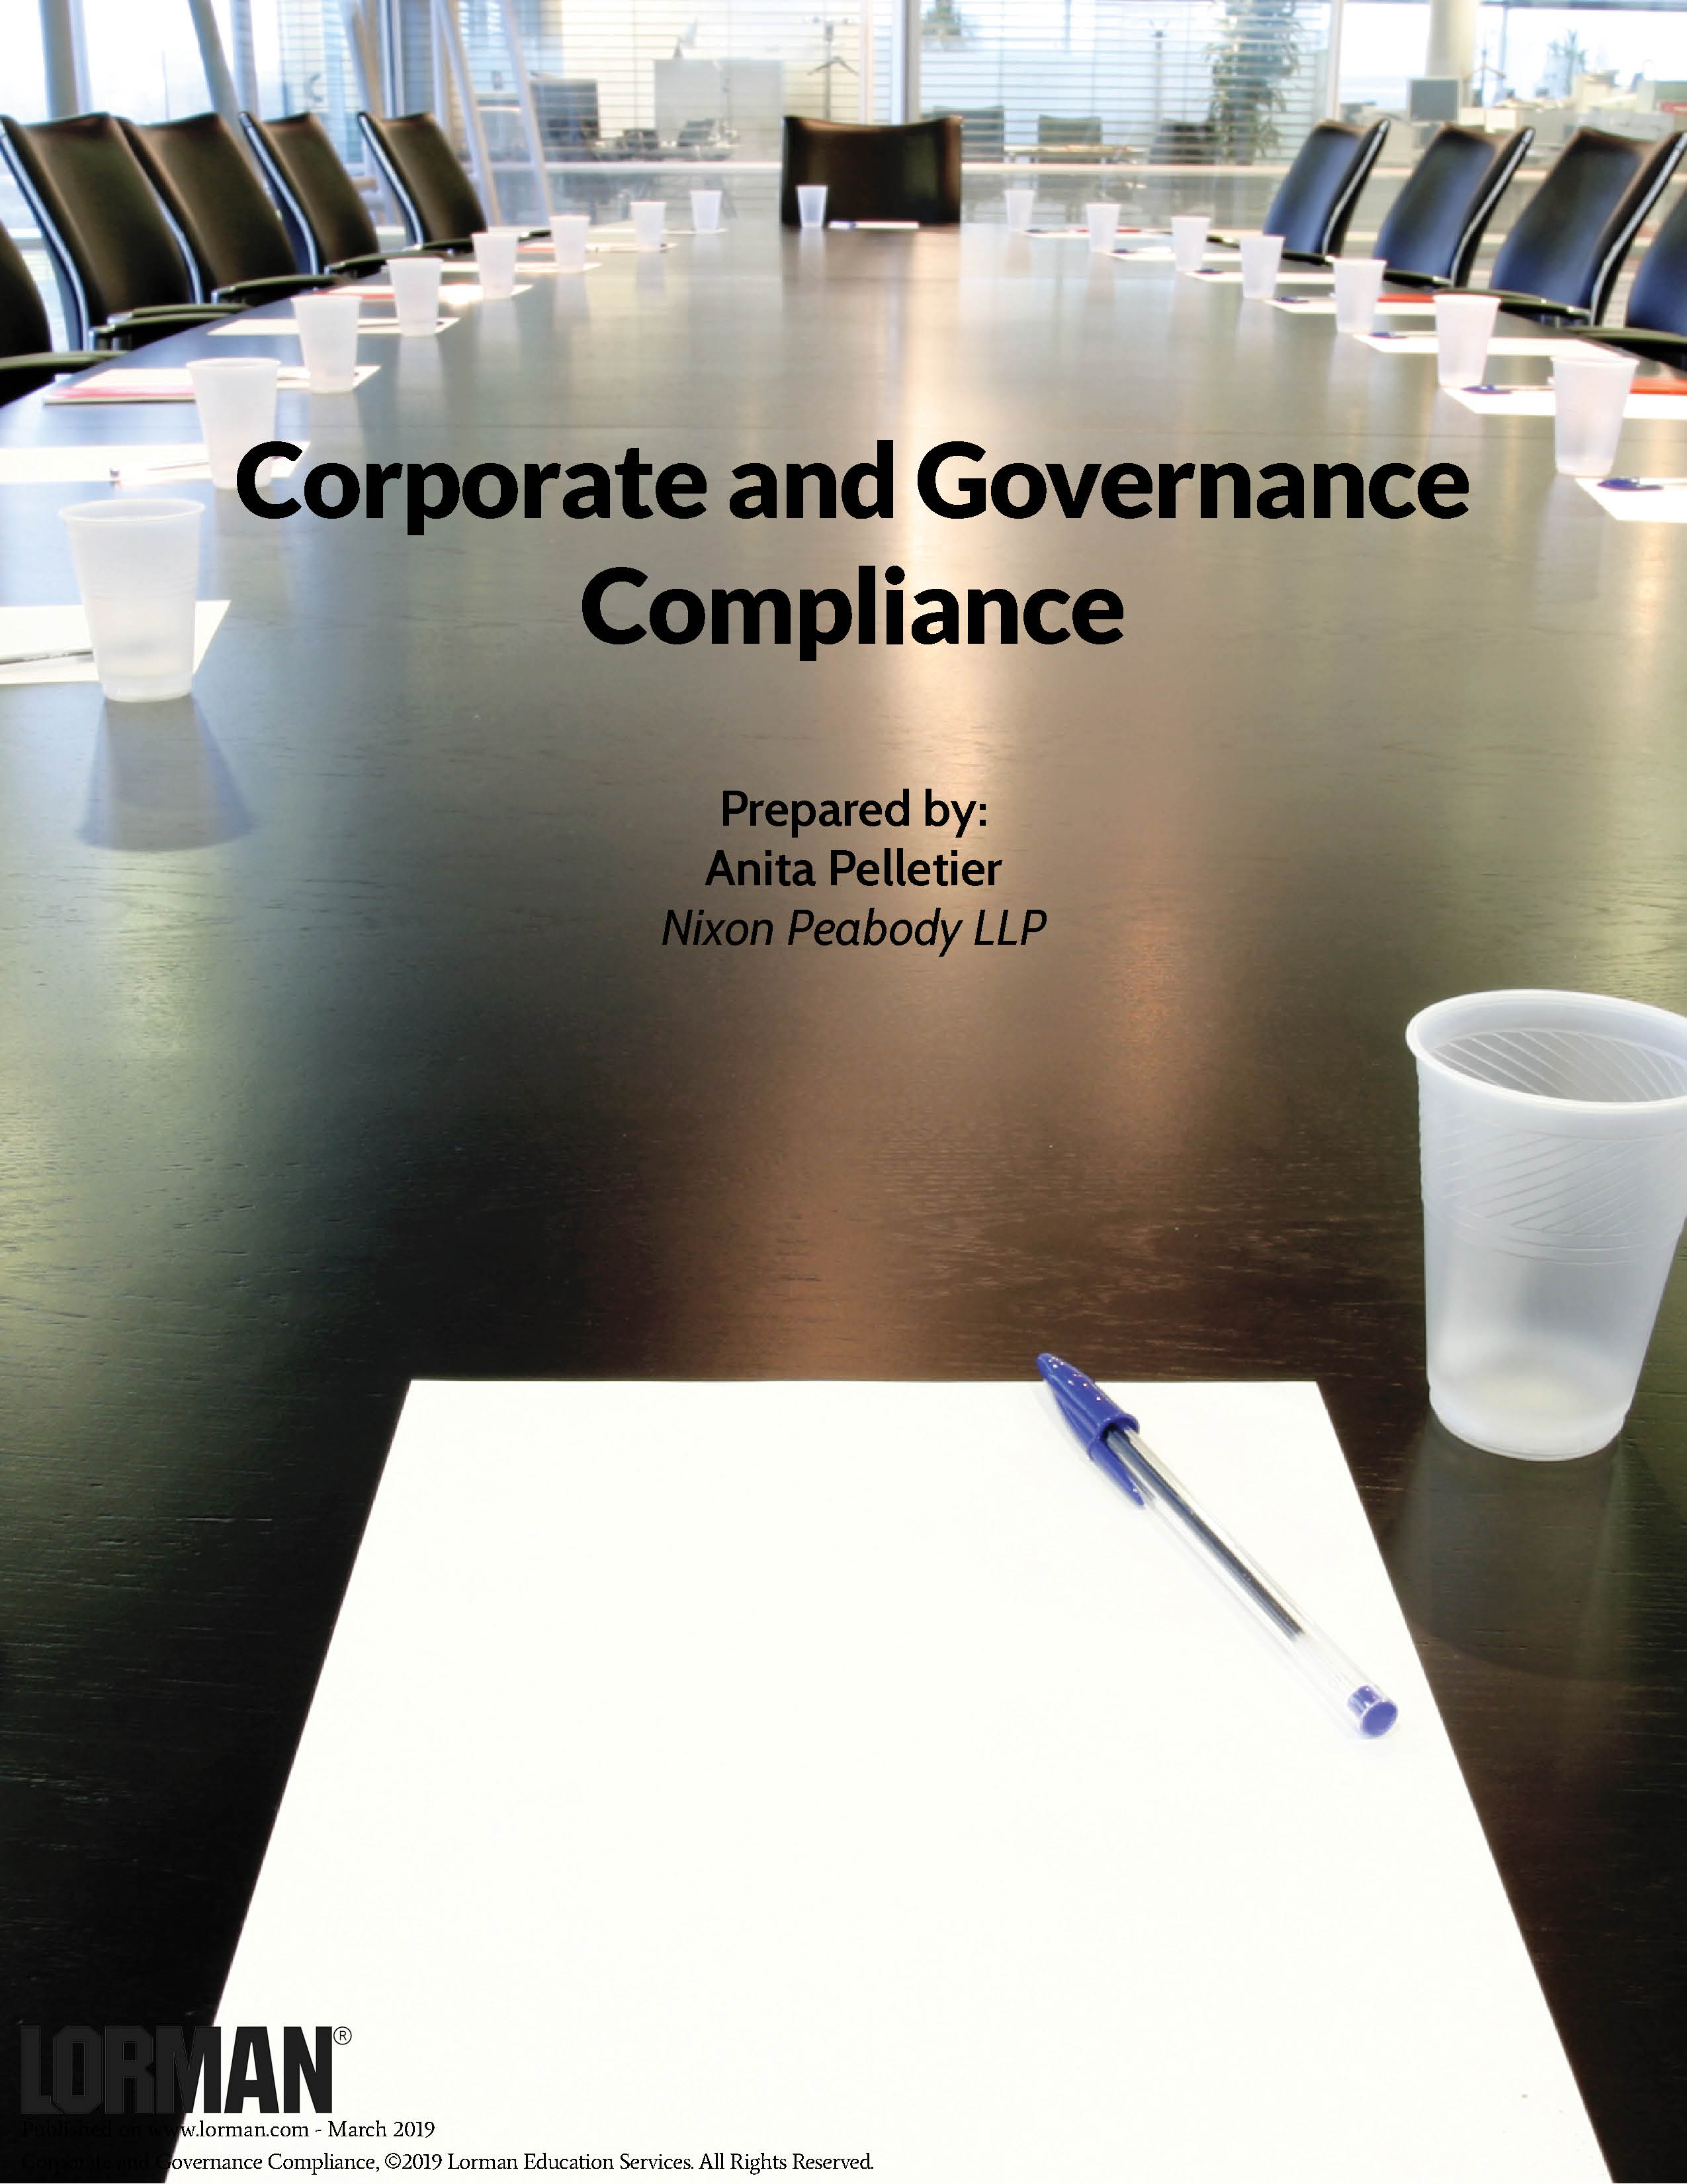 Corporate and Governance Compliance